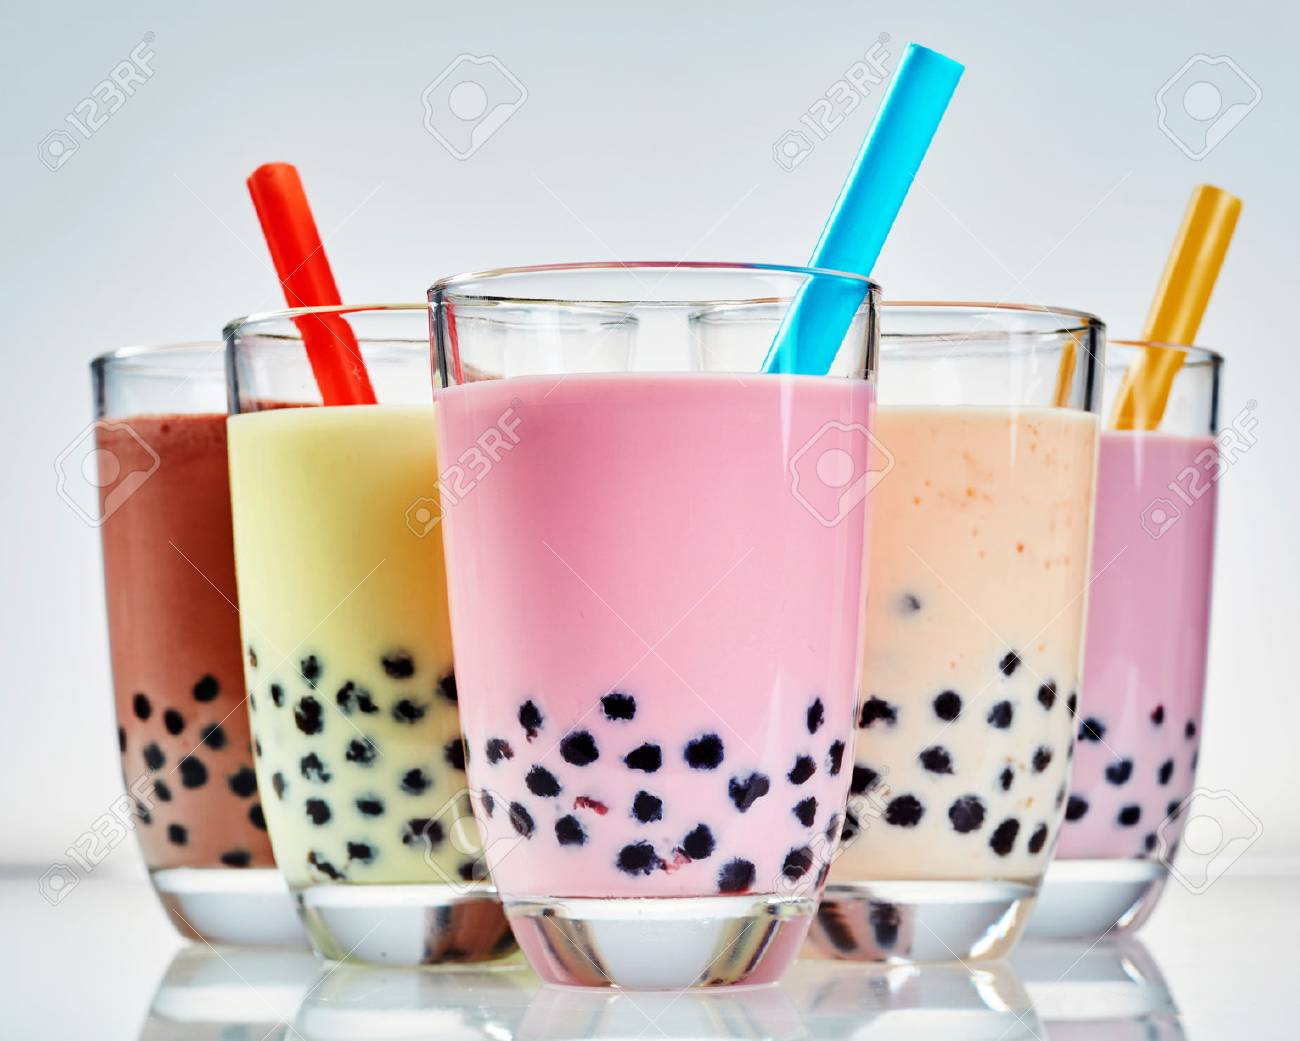 Crafting Your Own Bubble Tea: A Step-by-Step Guide